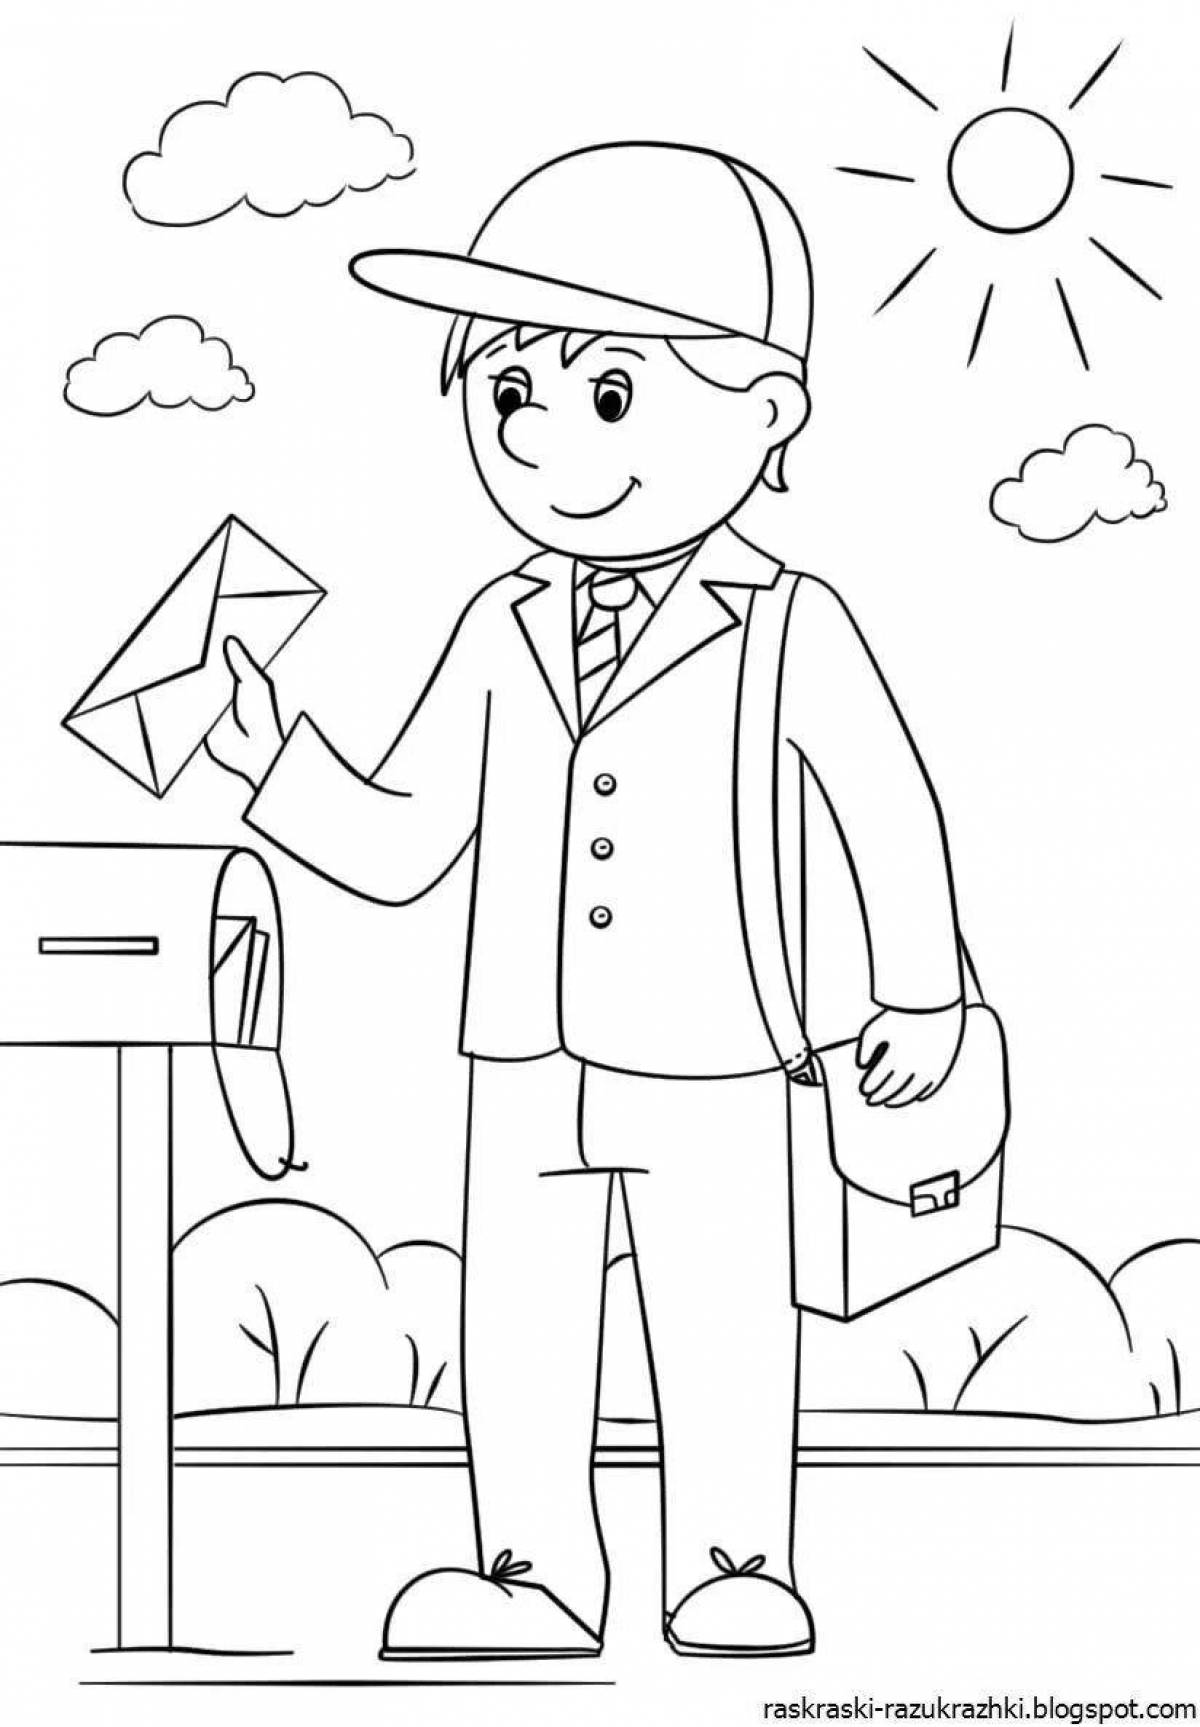 Innovative job coloring pages for schoolchildren